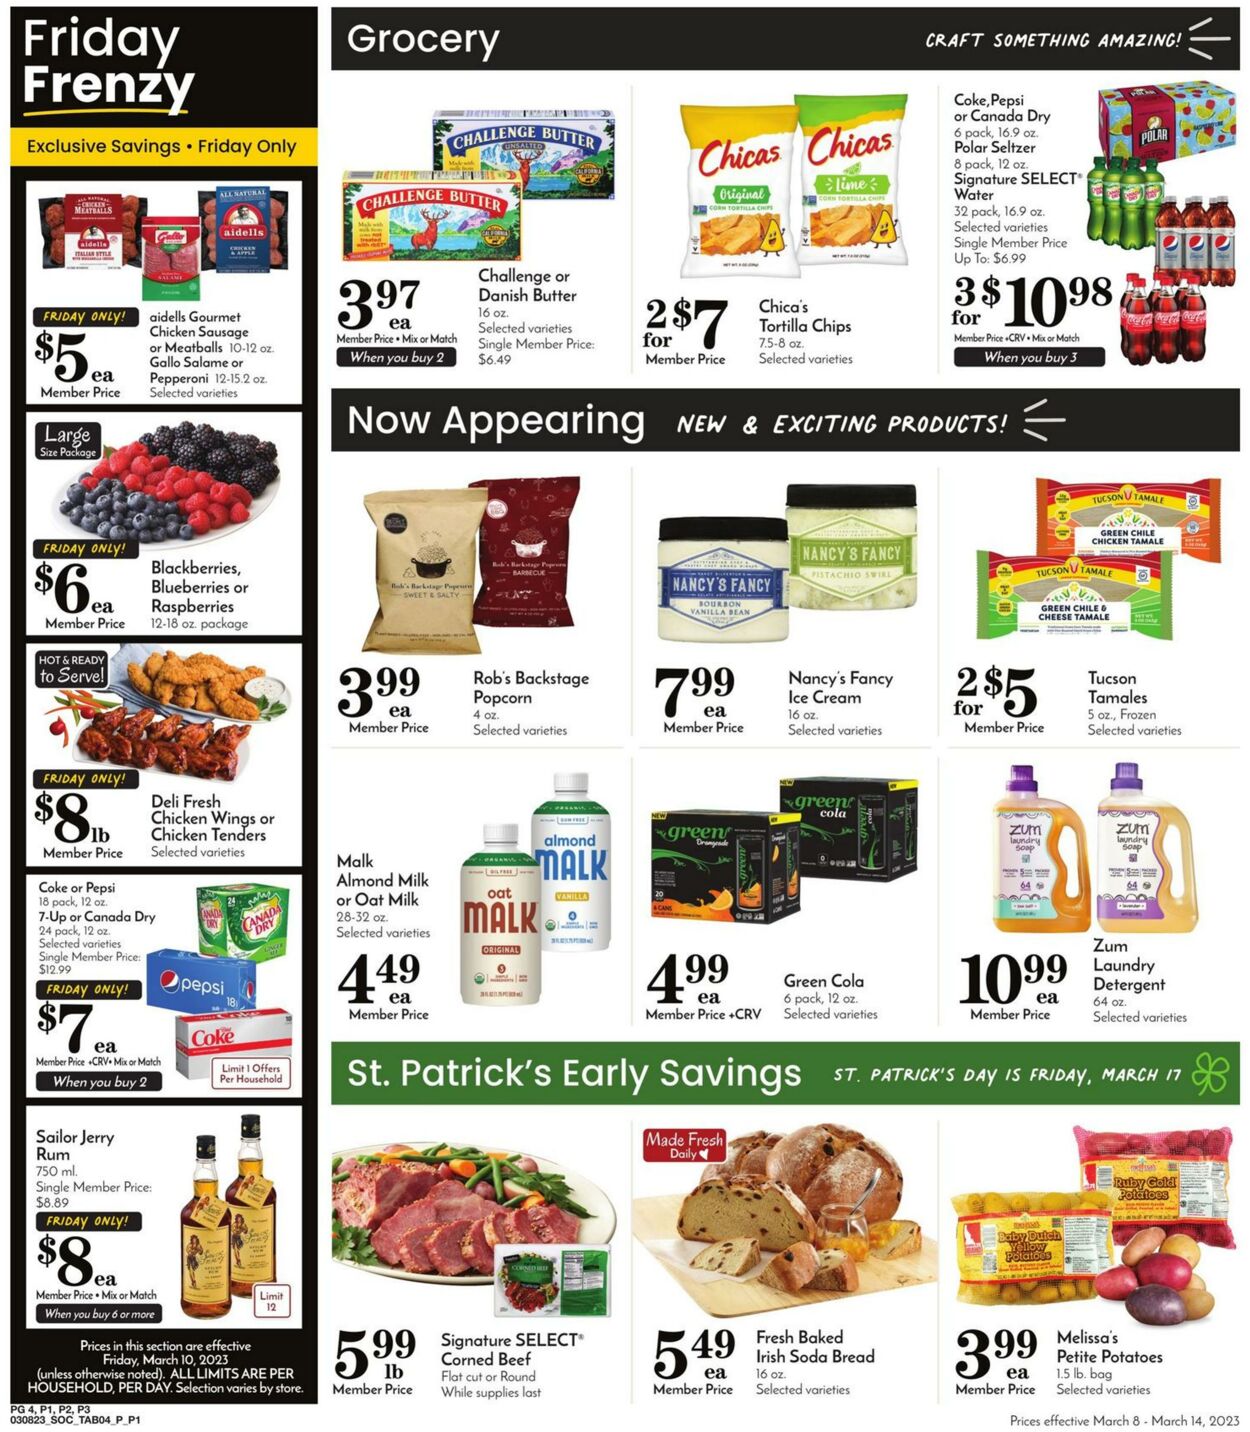 Weekly ad Pavilions 03/08/2023 - 03/14/2023